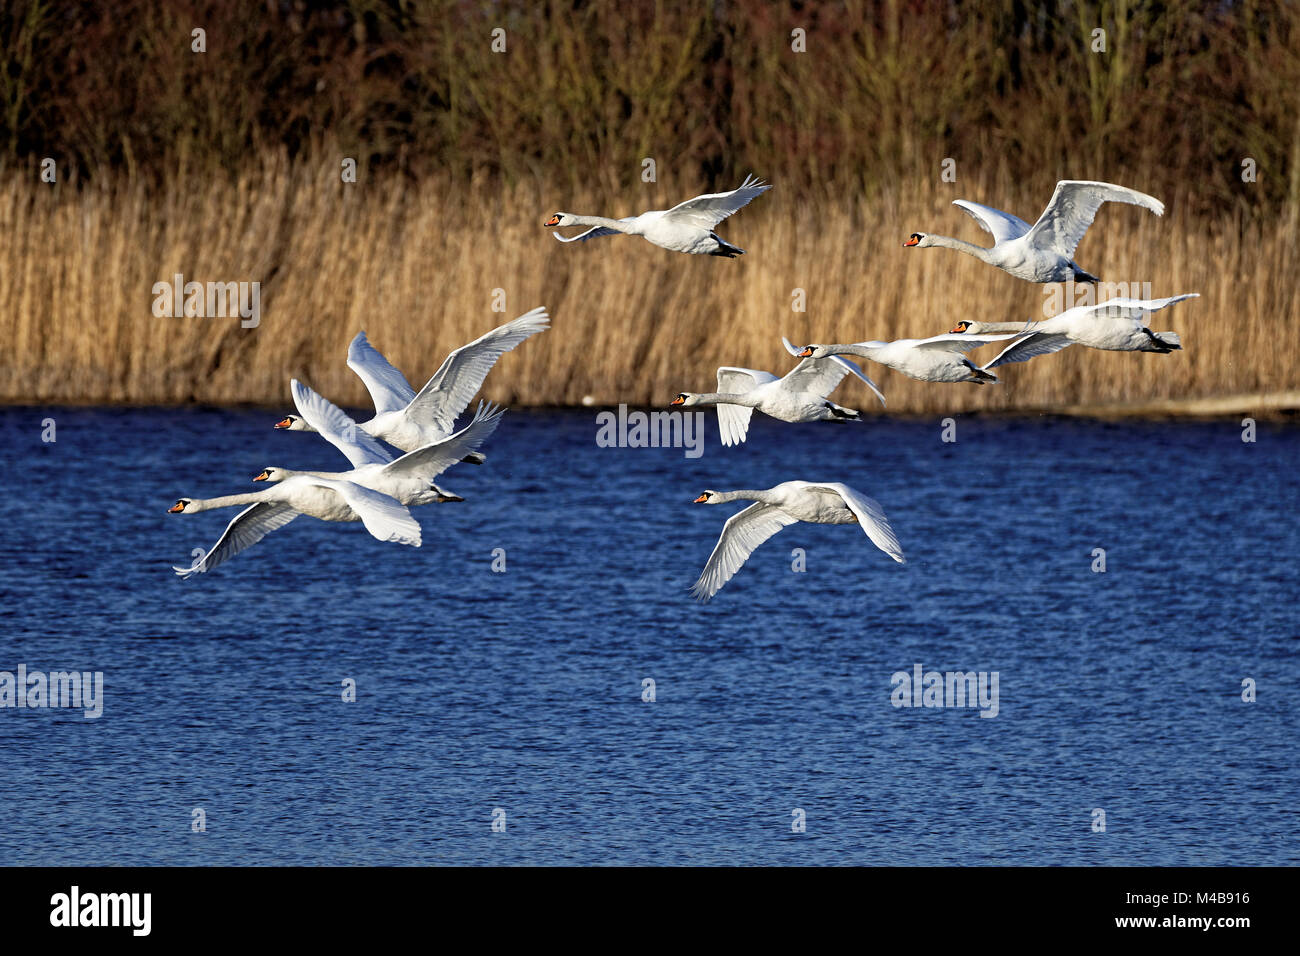 Mute swans flying Stock Photo